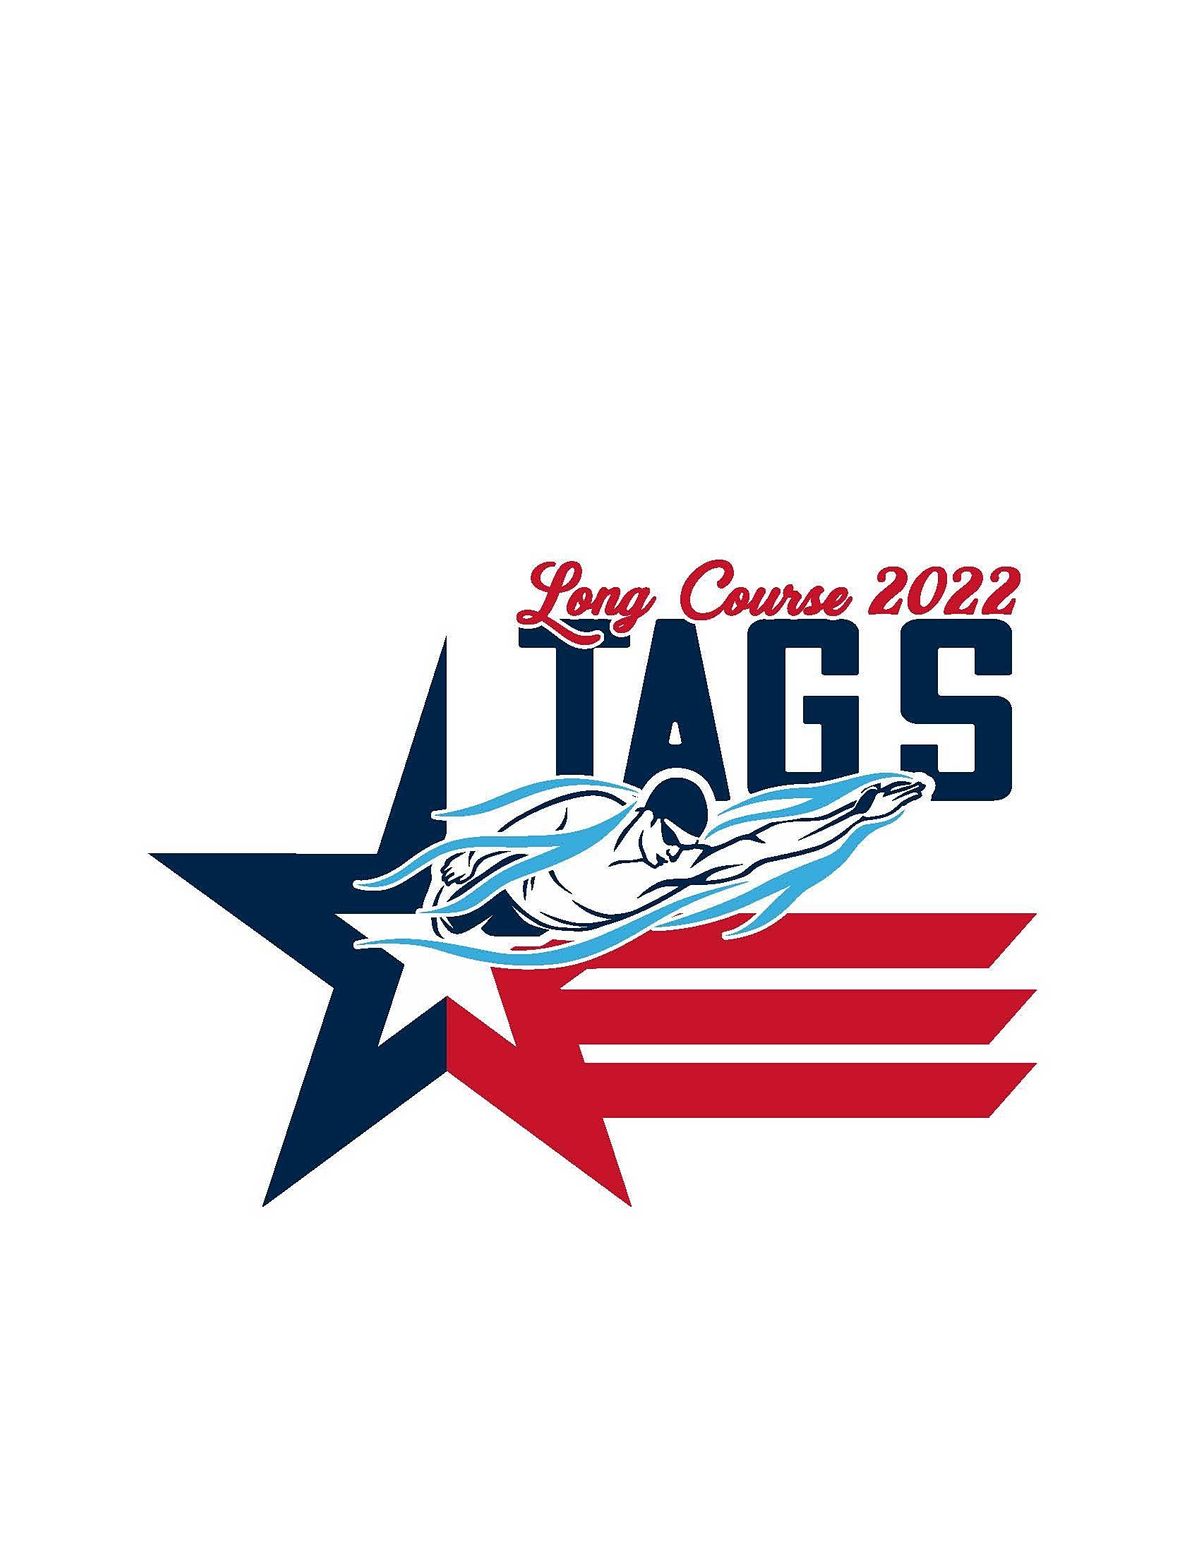 2022 LC TAGS LISD Westside Aquatic Center, Lewisville, TX July 20